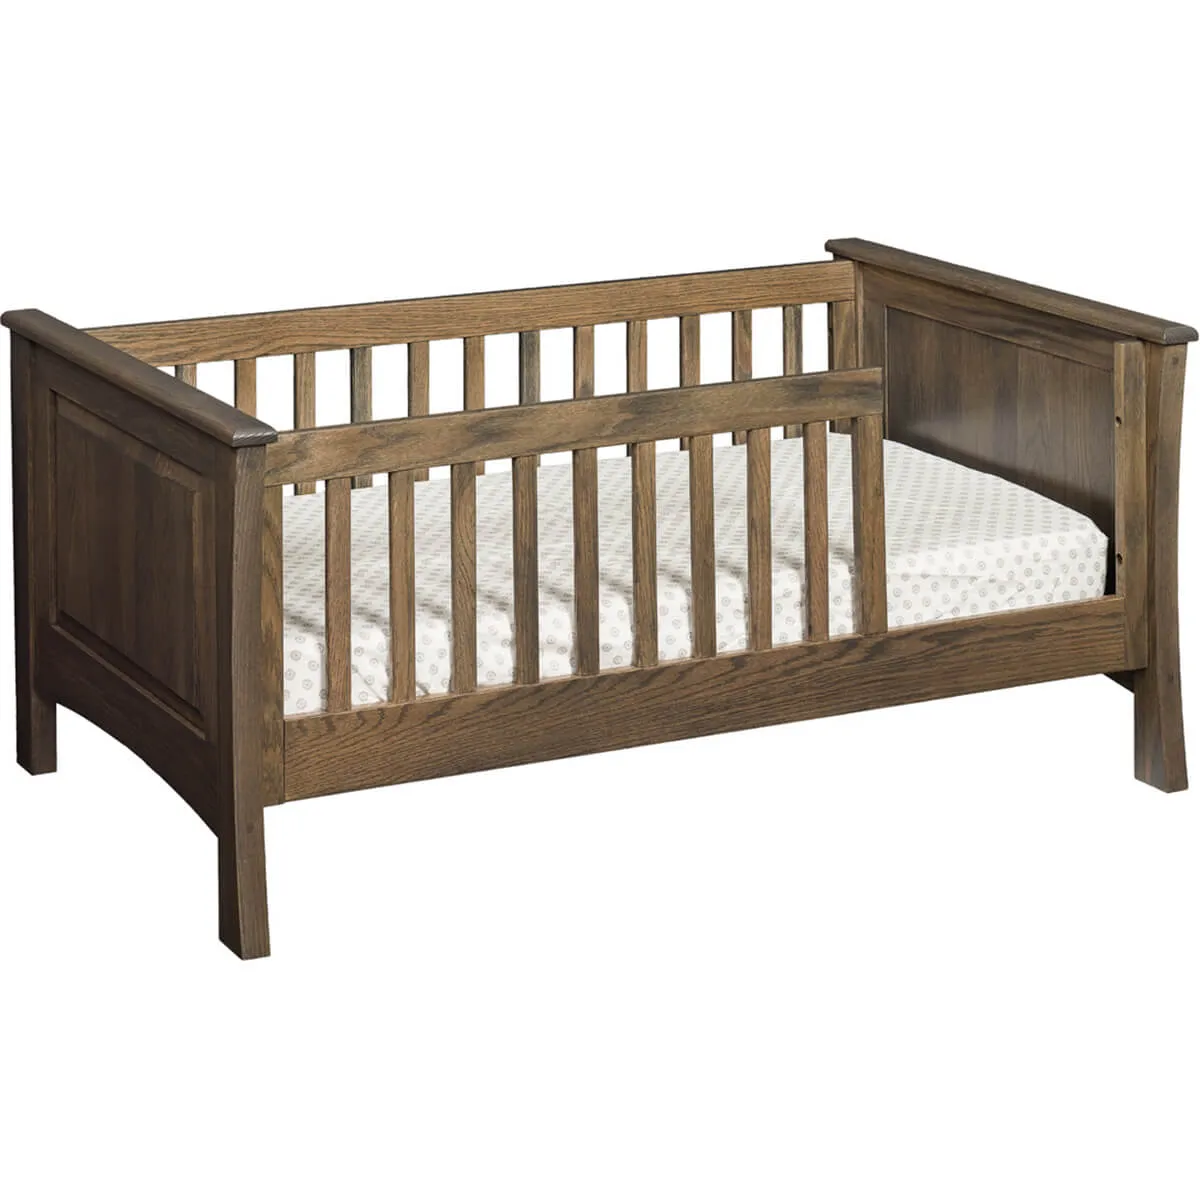 Toddler Bed with Panels